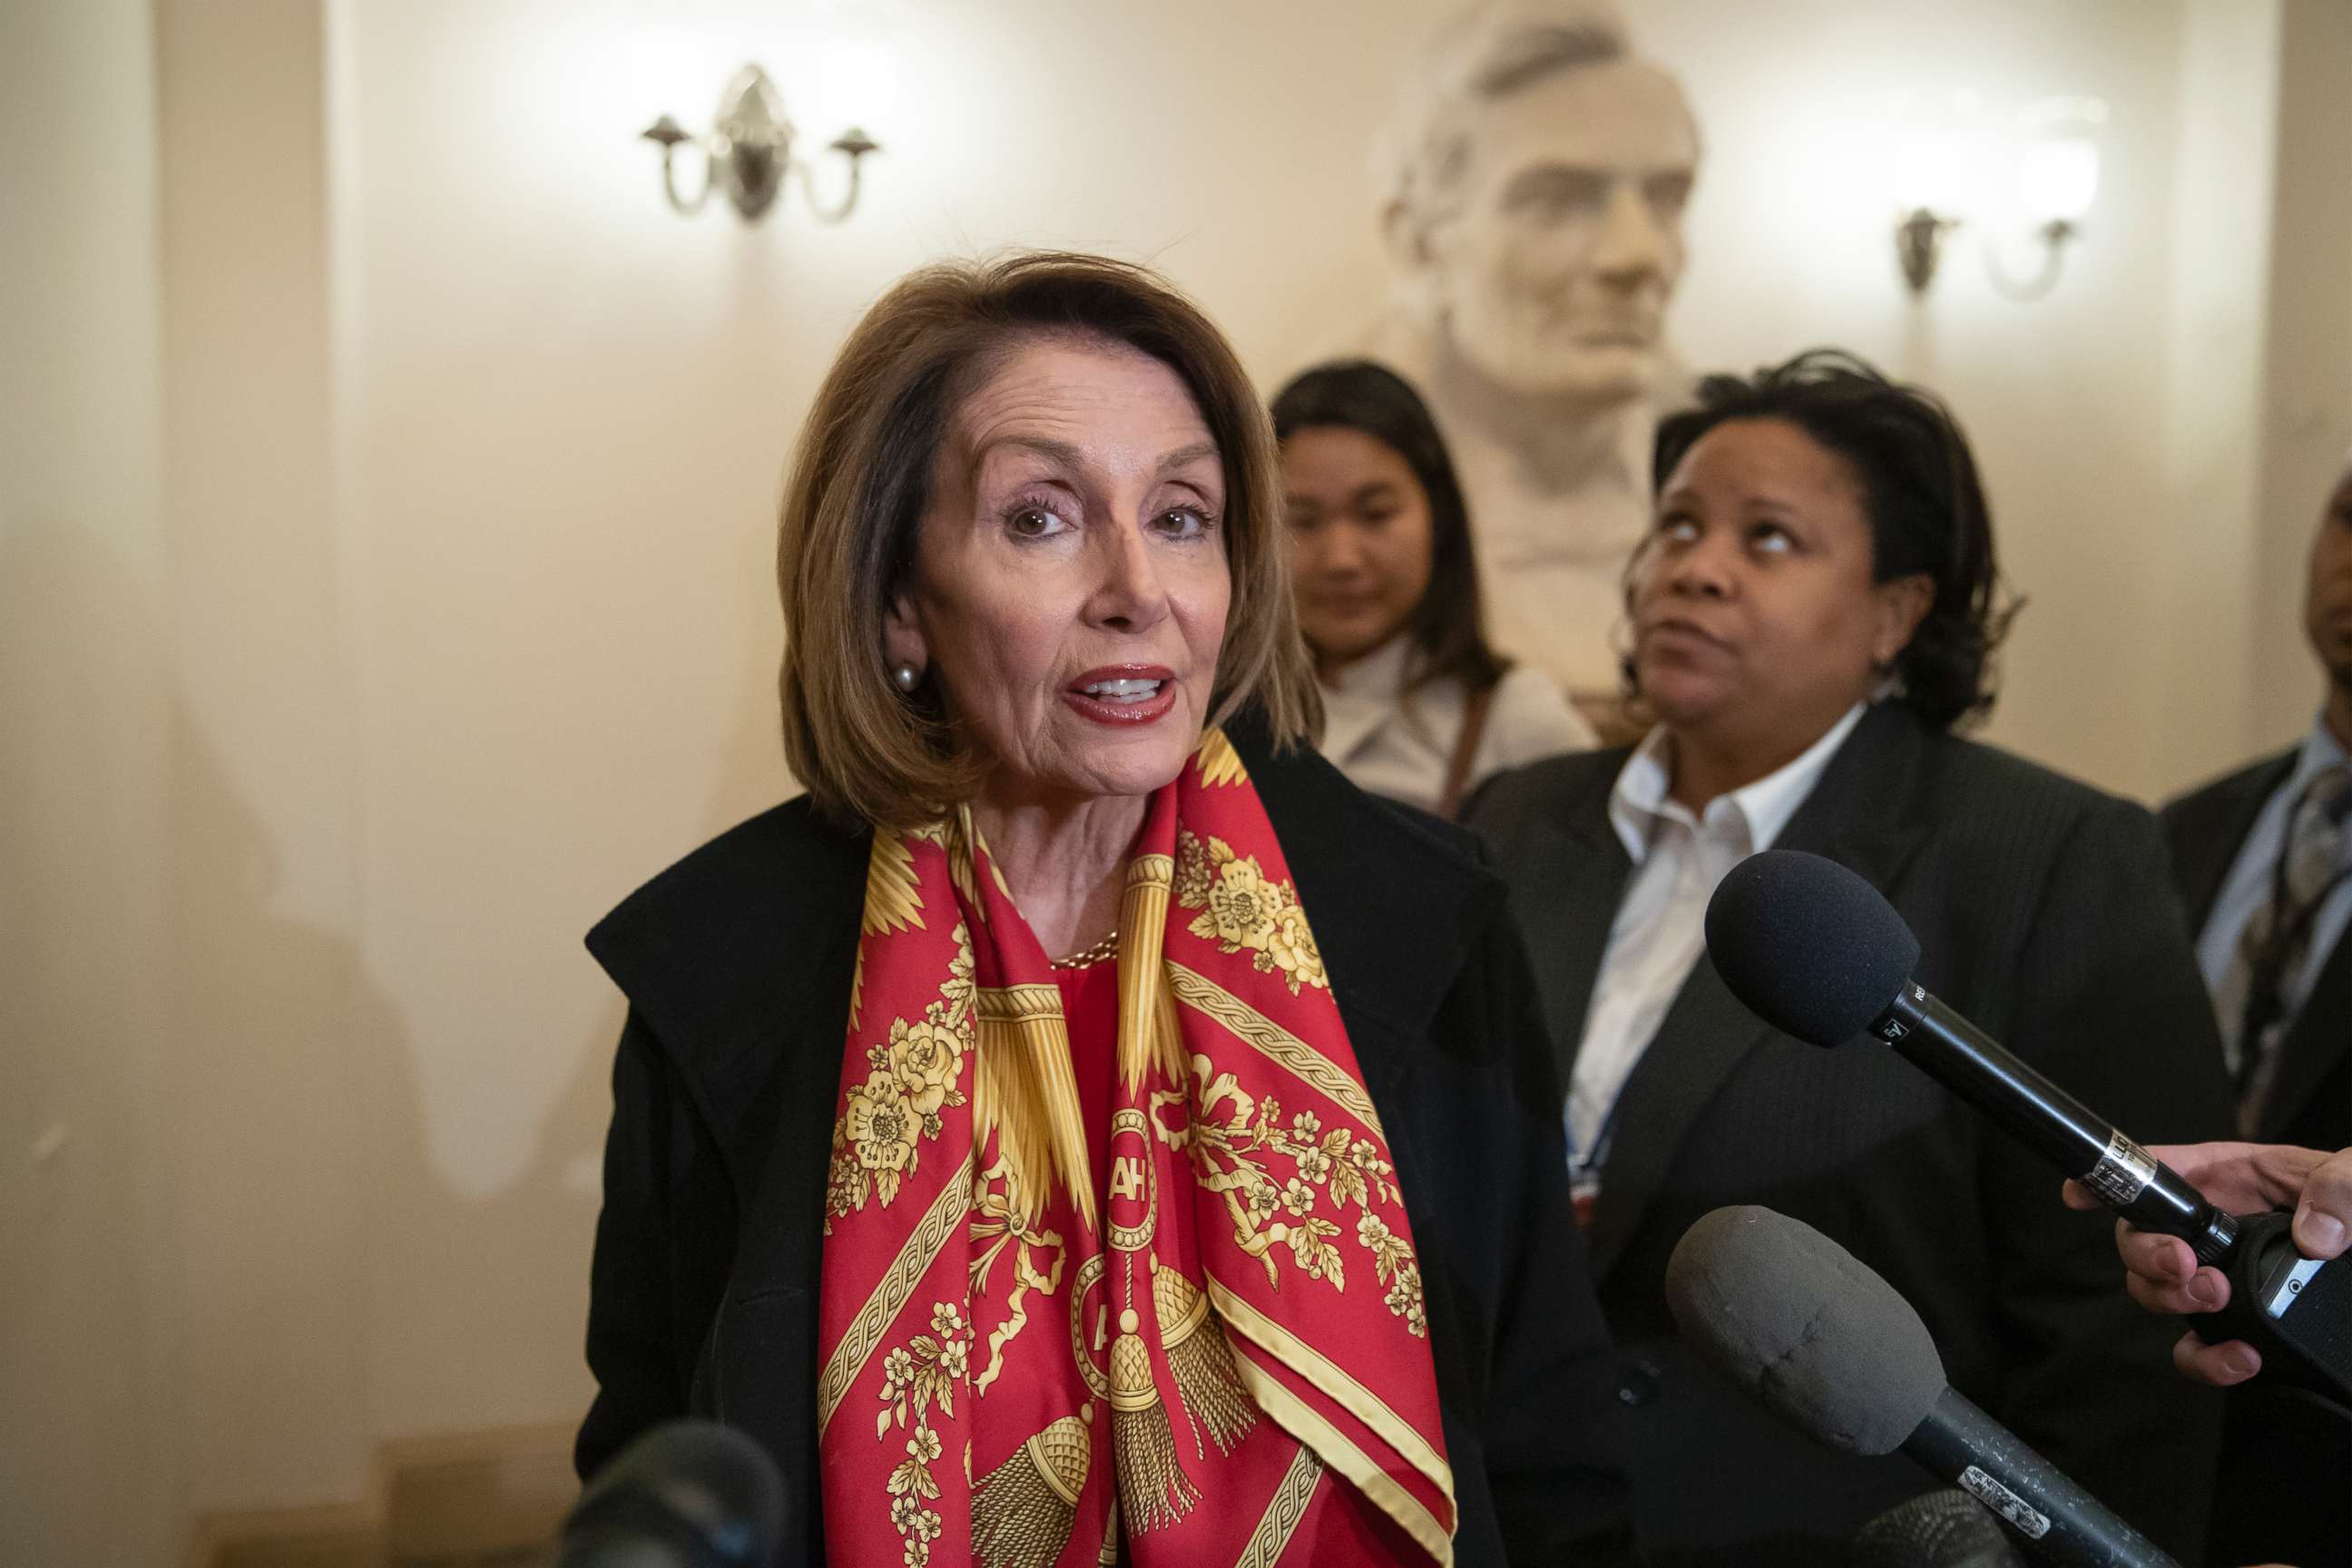 PHOTO: Speaker of the House Nancy Pelosi responds to reporters after officially postponing President Donald Trump's State of the Union address until the government is fully reopened, at the Capitol in Washington, Jan. 23, 2019.